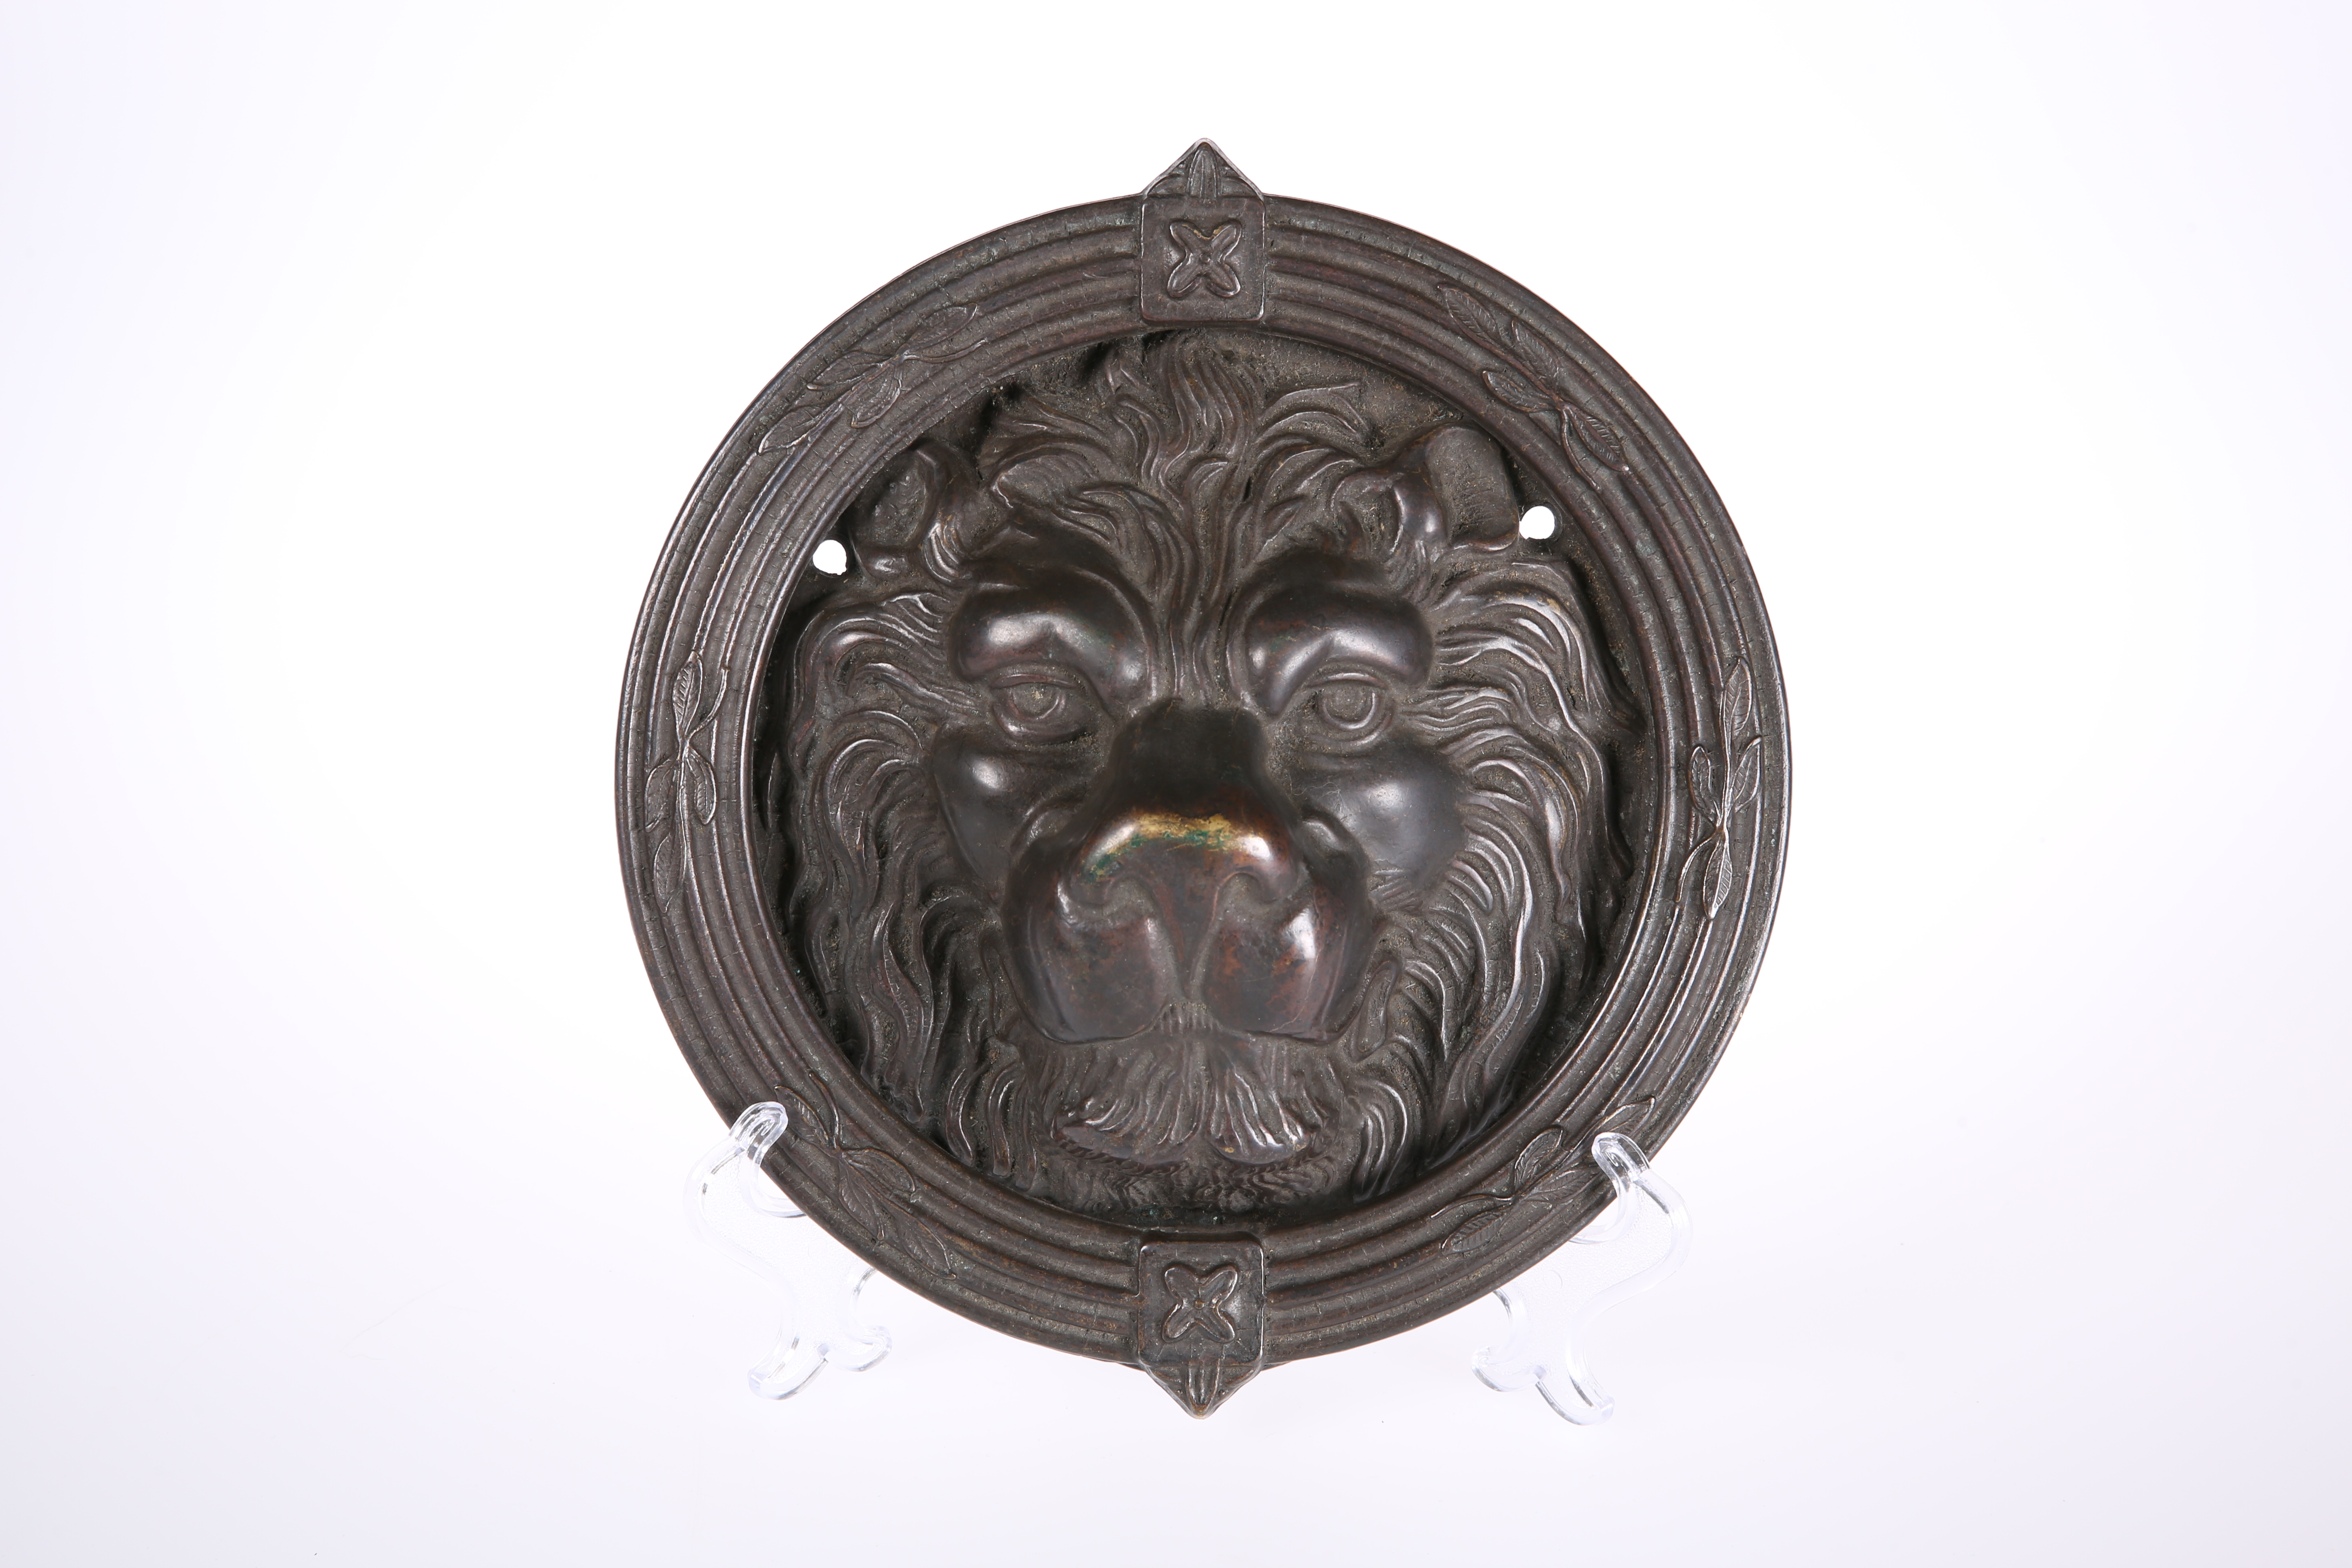 A PATINATED BRONZE LION MASK DOOR KNOCKER, EARLY 19th CENTURY